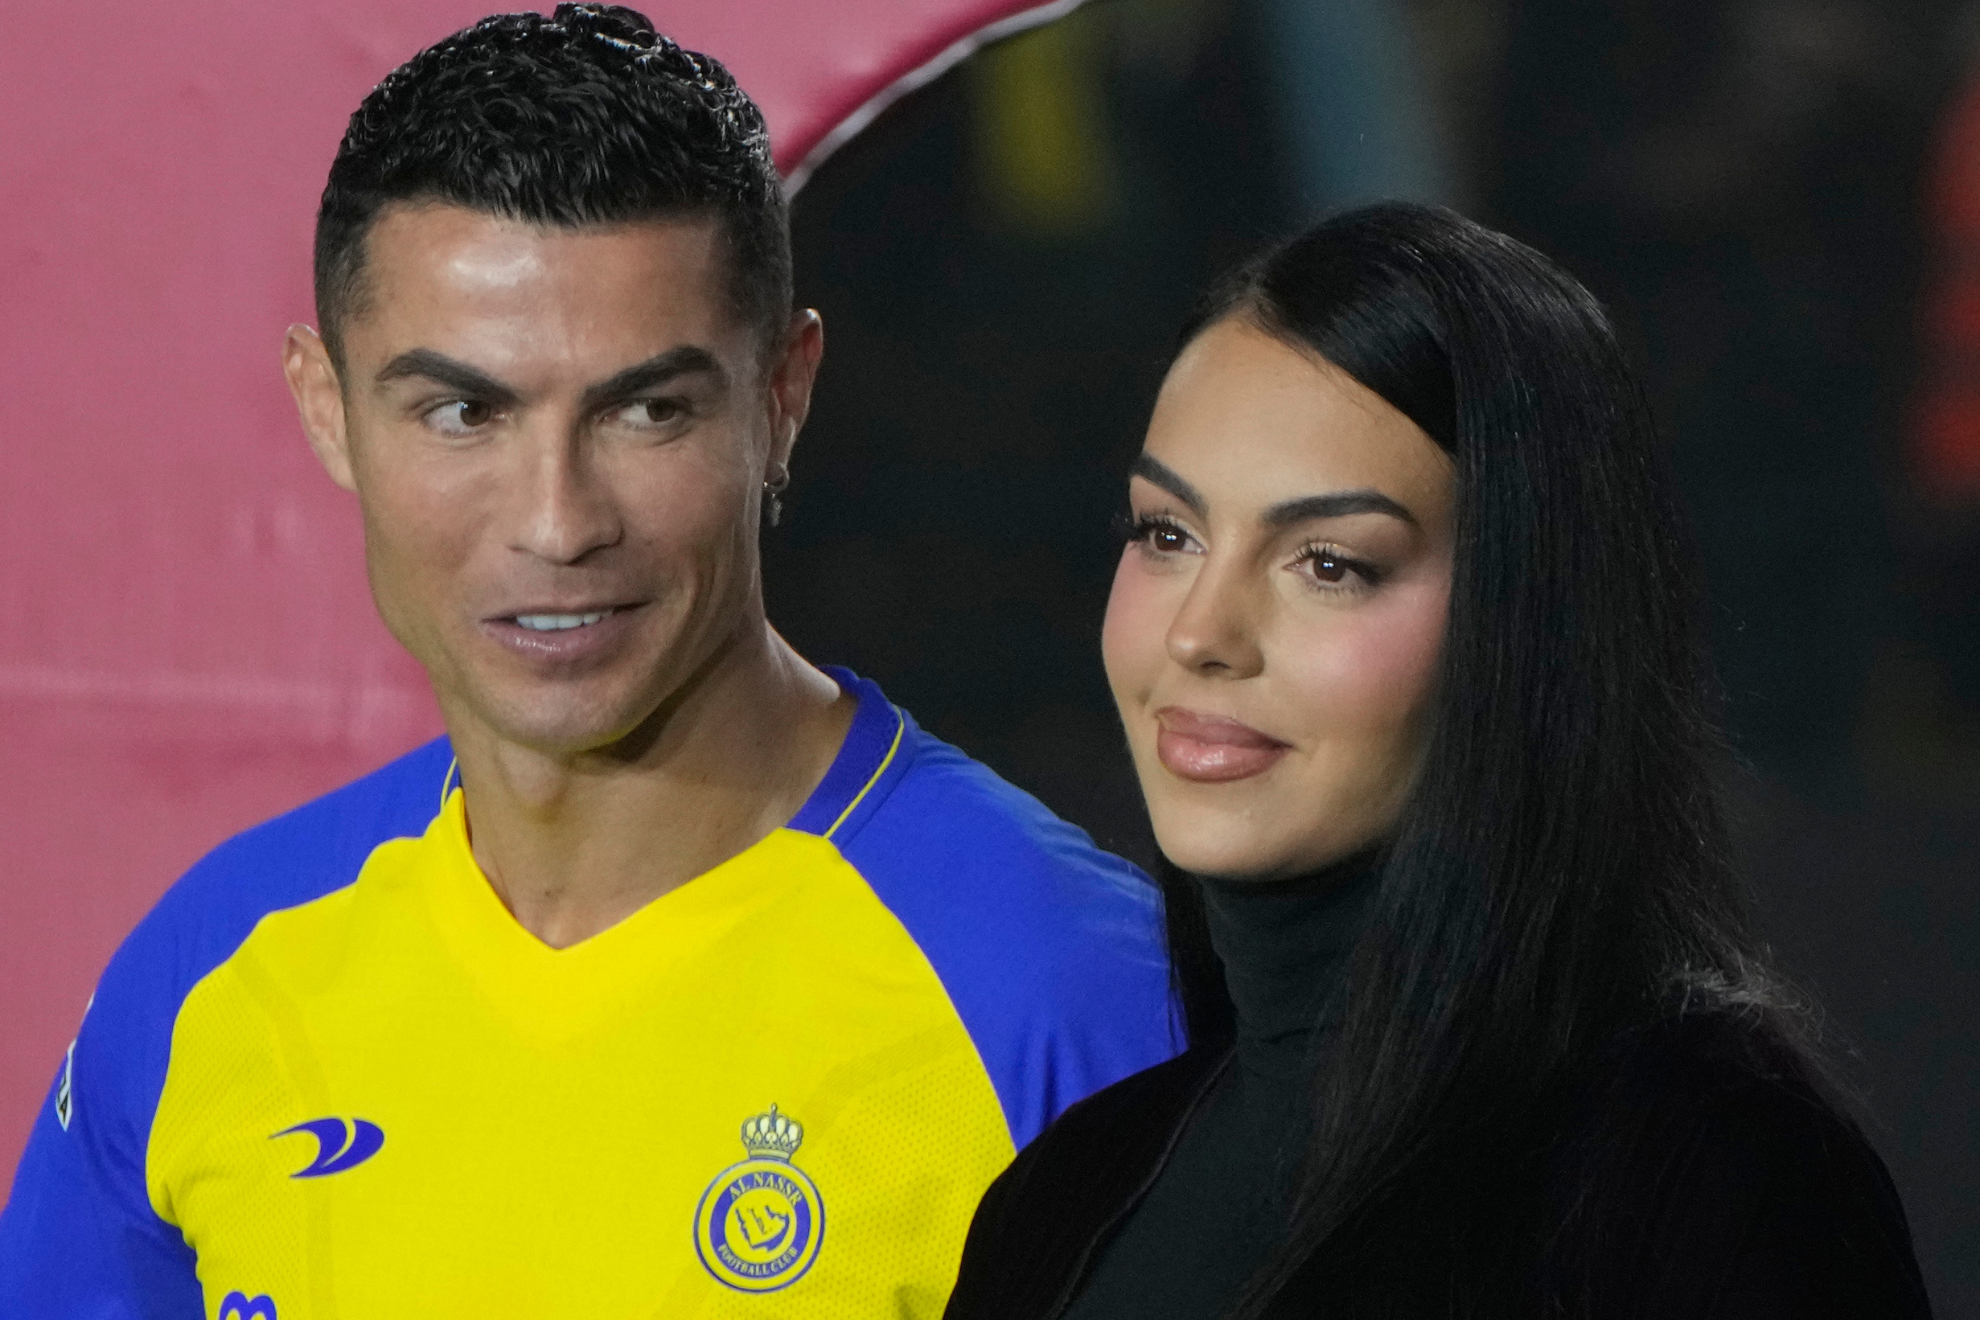 Cristiano Ronaldo and Georgina Rodriguez show perfect bodies in get away trip to paradise